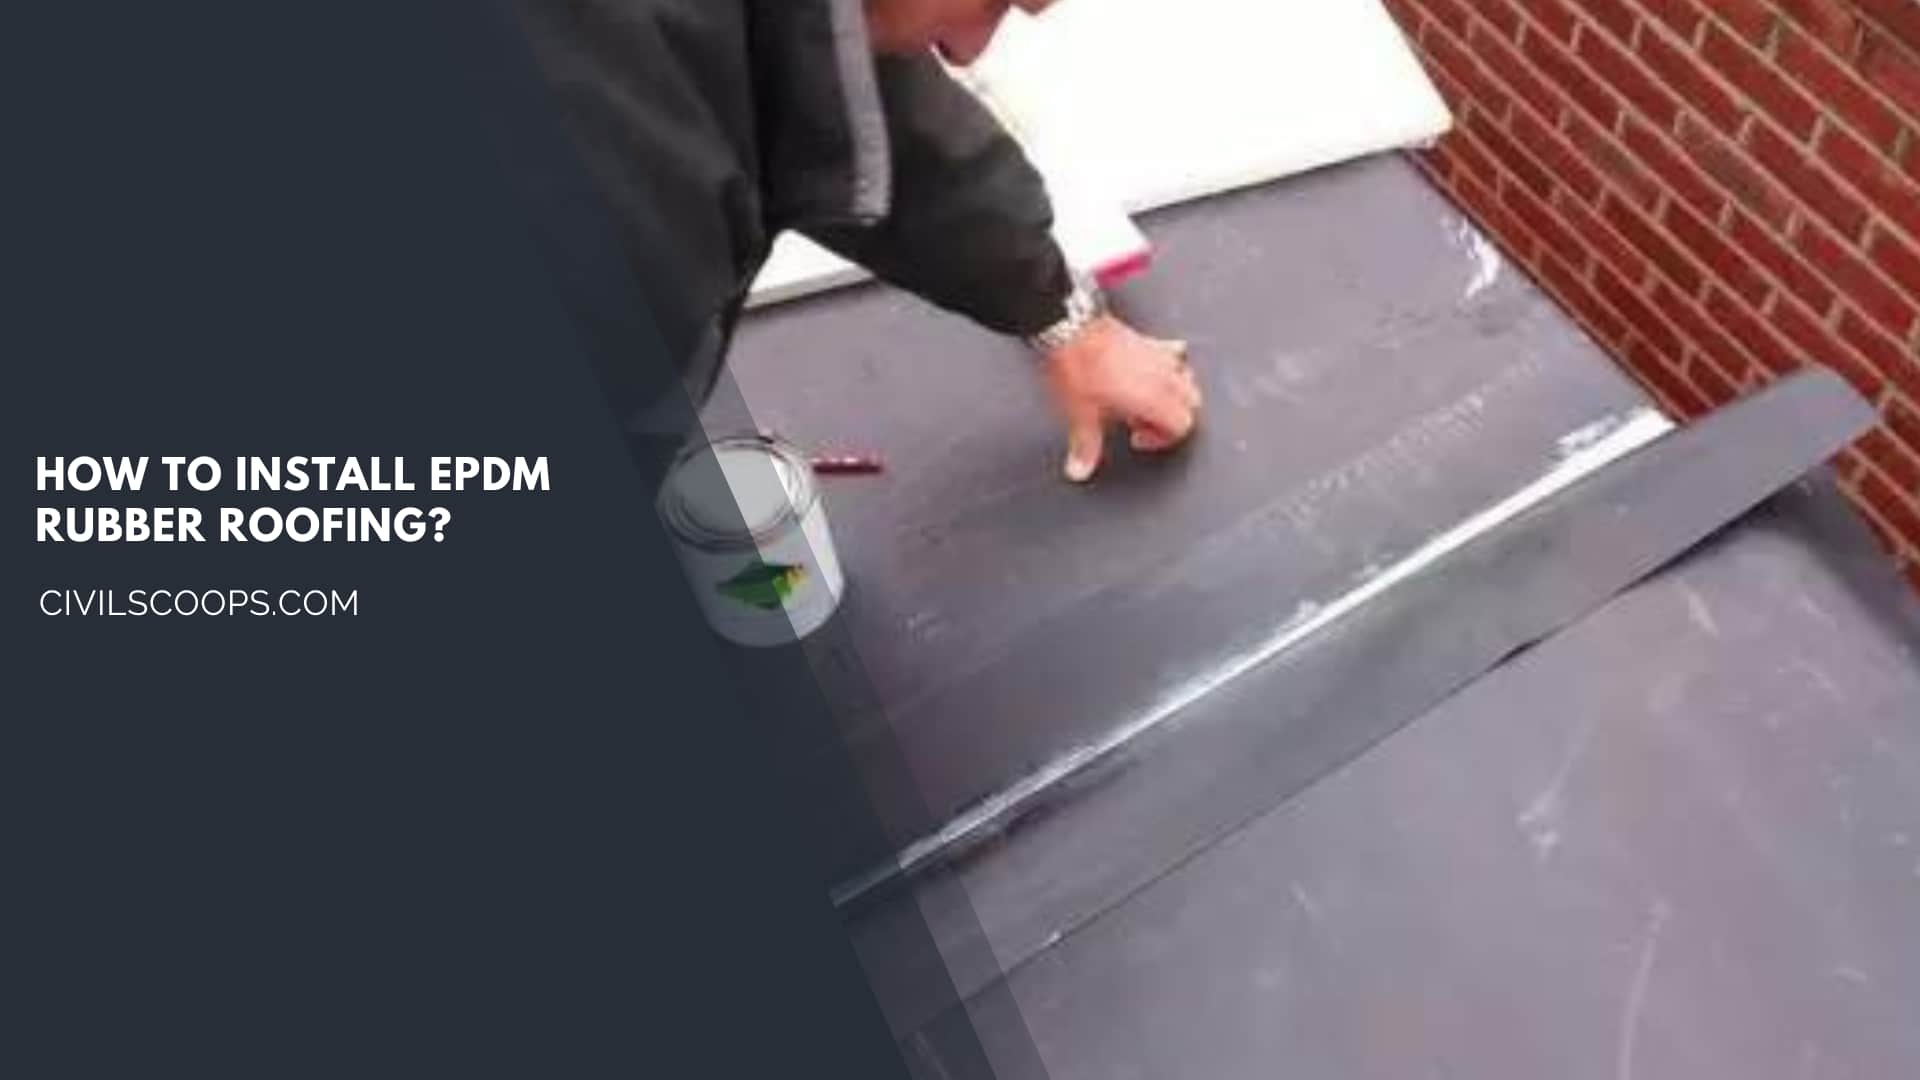 How to Install EPDM Rubber Roofing?